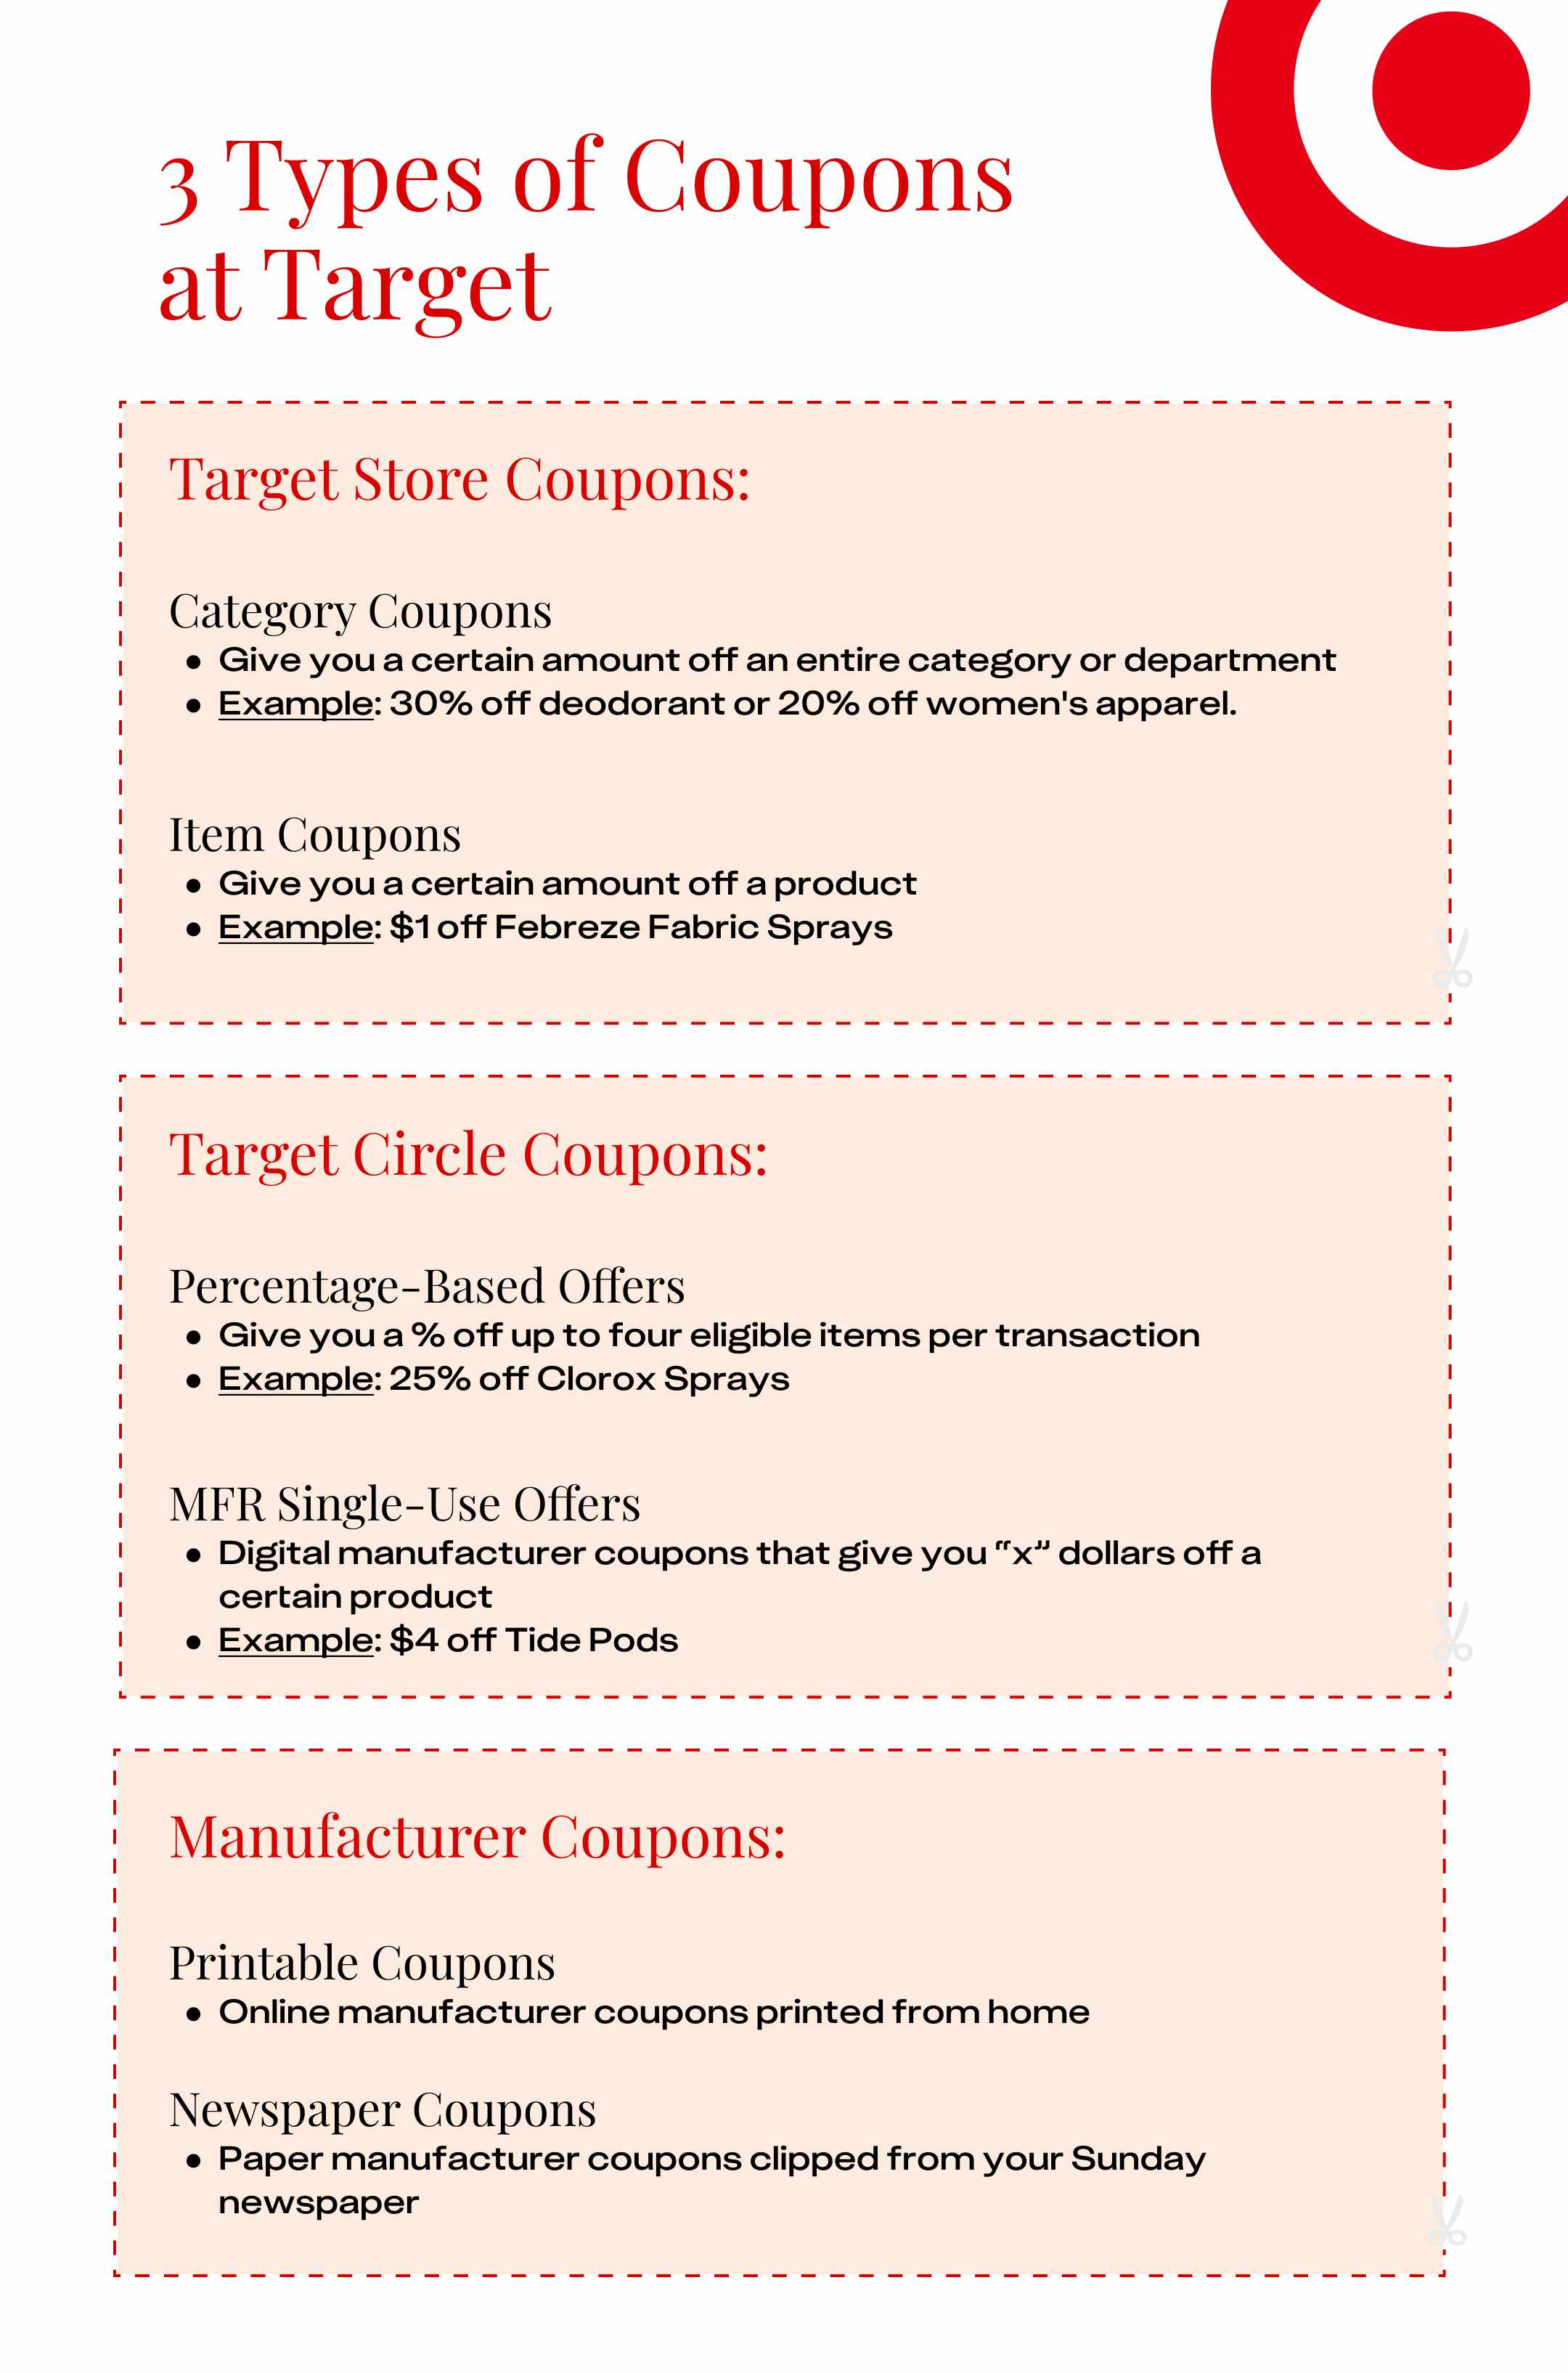 A graphic showing the three types of coupons to use at Target: Target store coupons (category coupons and item coupons), Target Circle Coupons (Percentage-Based Offers and MFR Single-Use offers), and Manufacturer coupons (printable coupons and newspaper coupons)